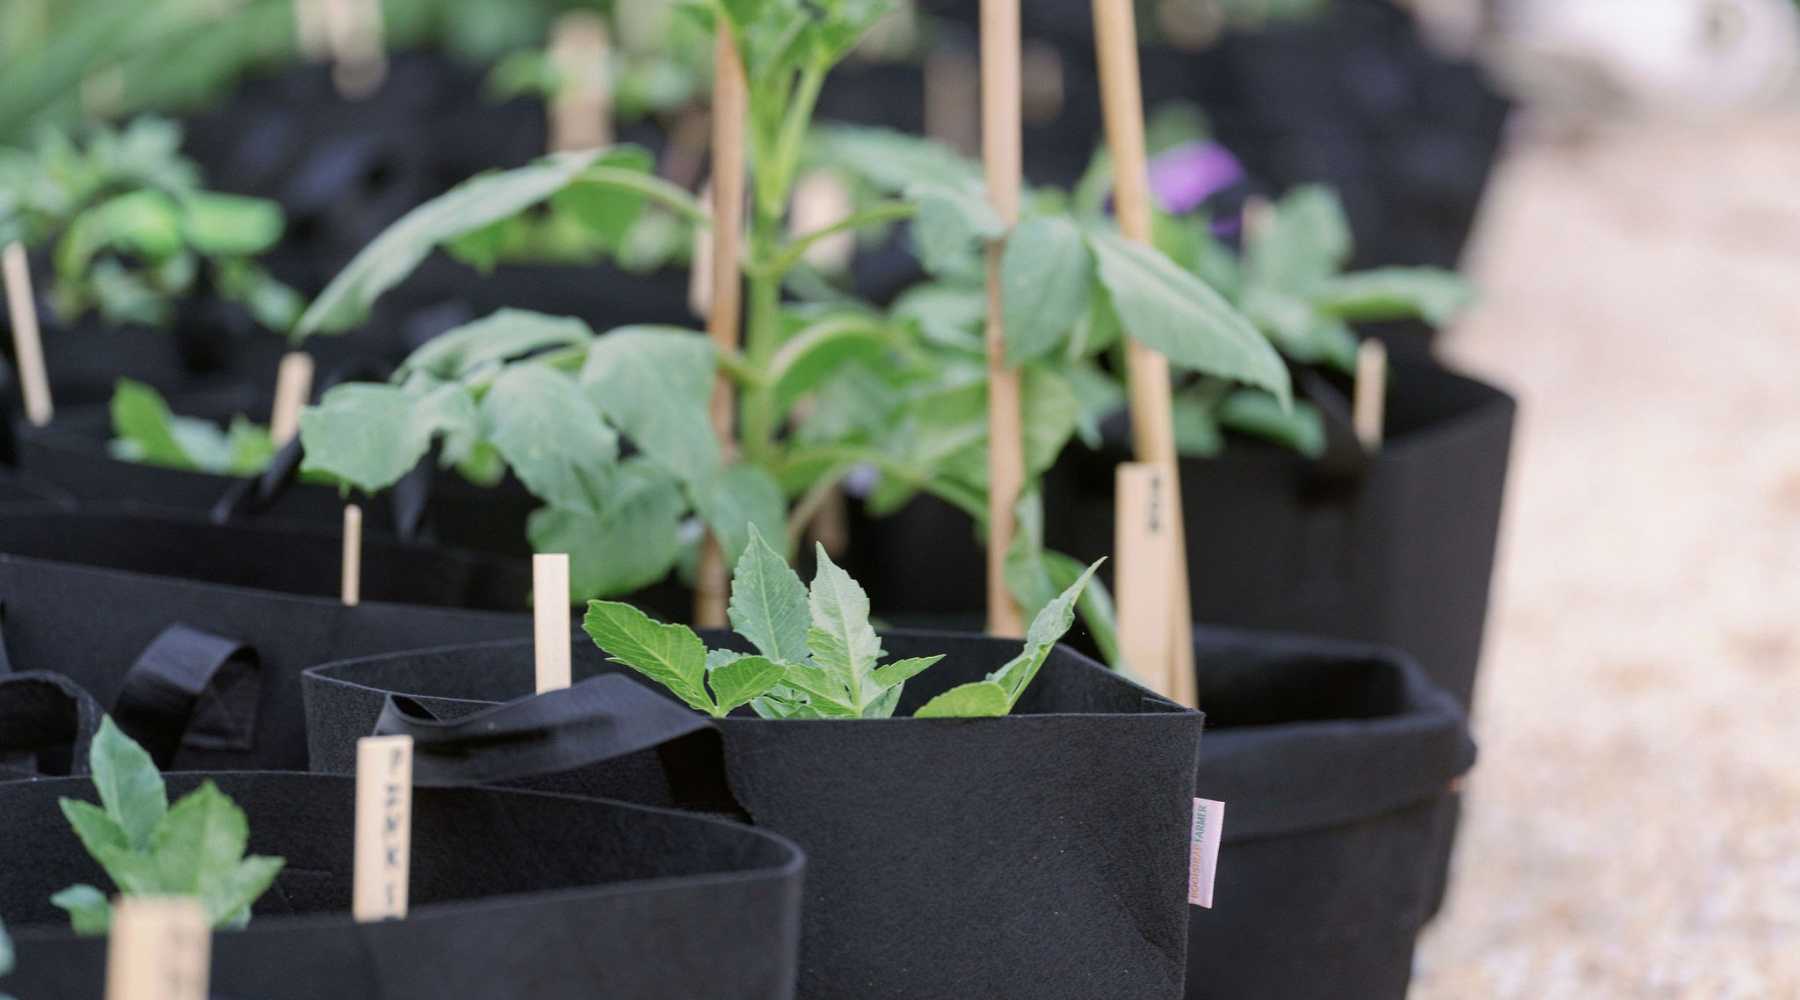 Planting in fabric grow bags